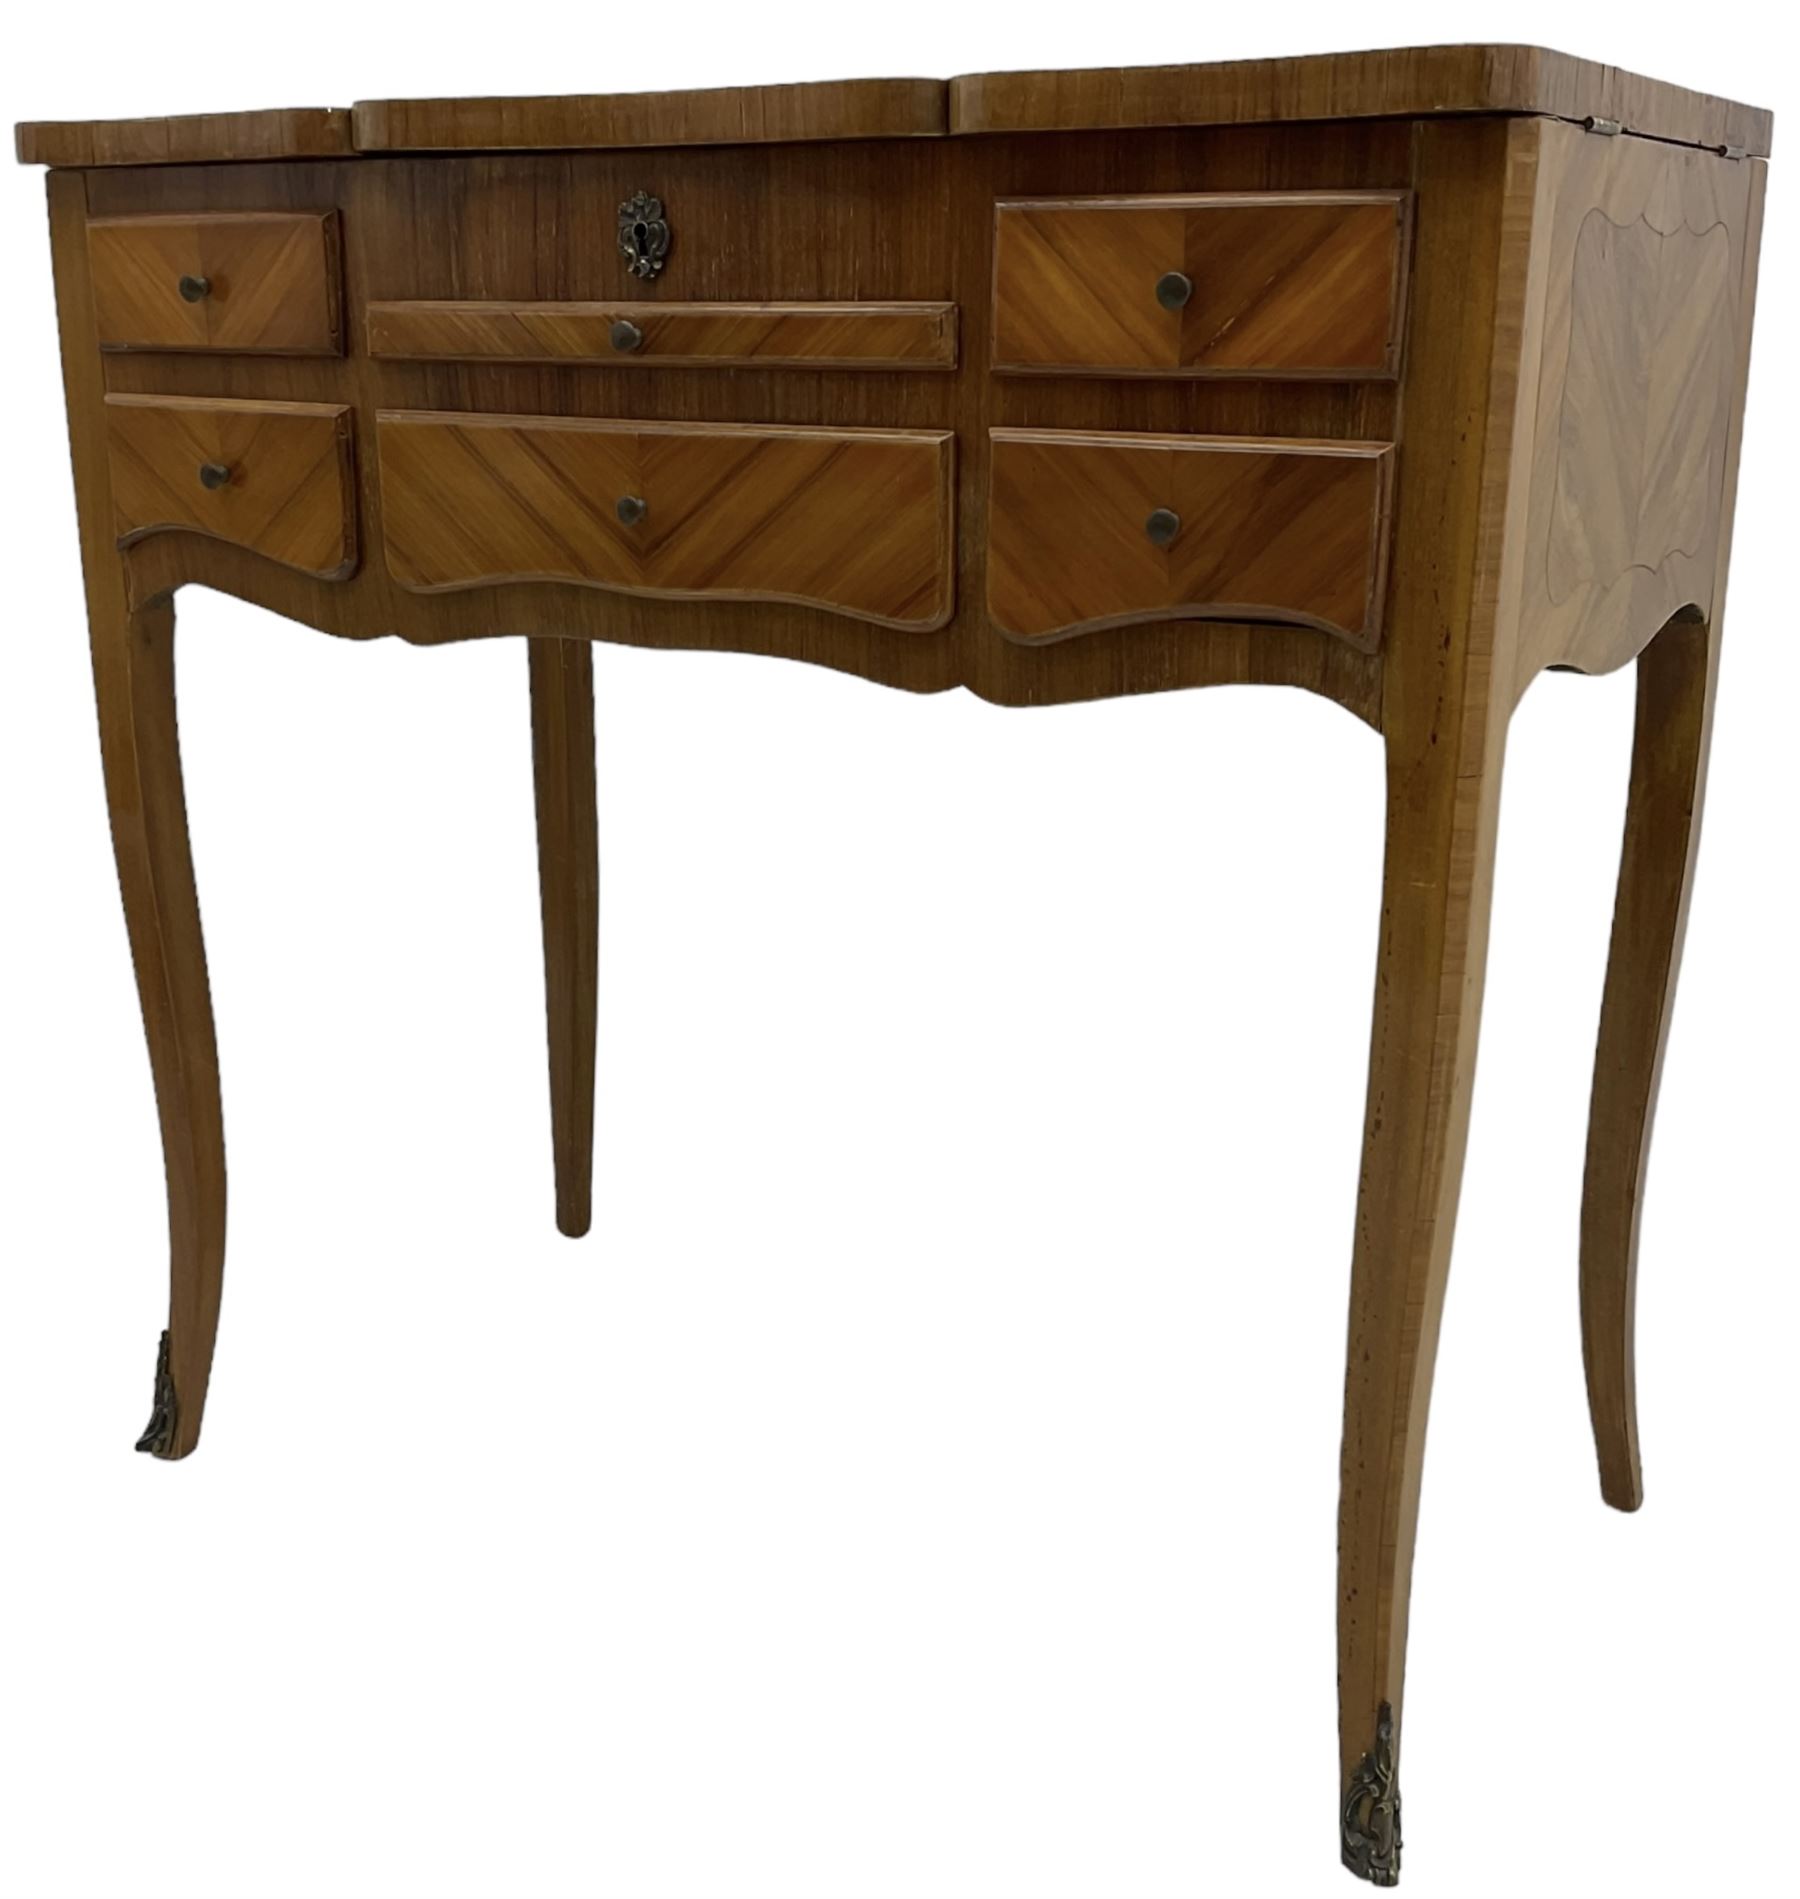 French inlaid walnut dressing table - Image 3 of 7